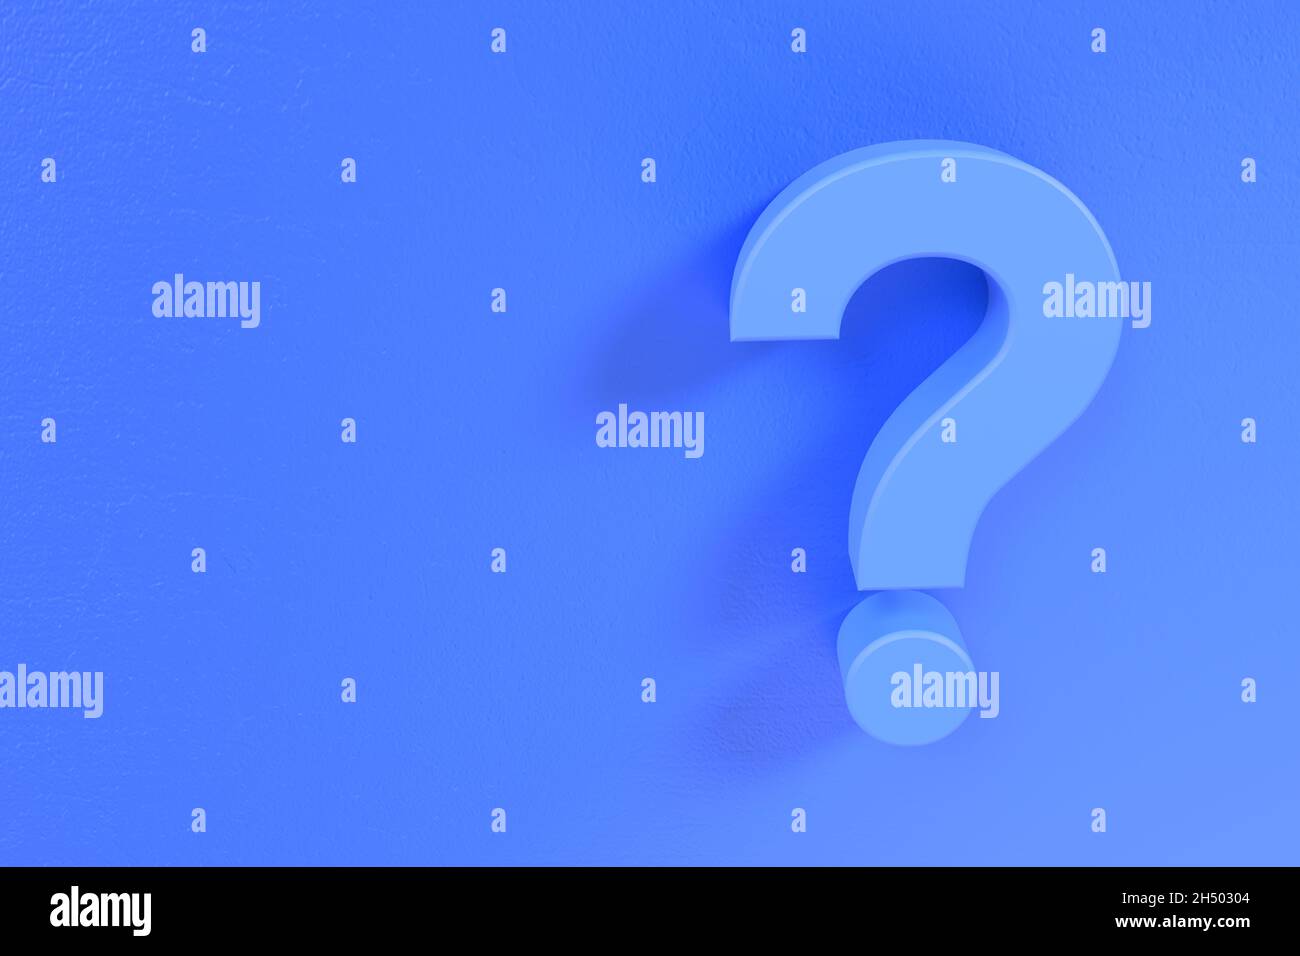 question mark on the plane 3d wall in blue with space to add content Stock Photo